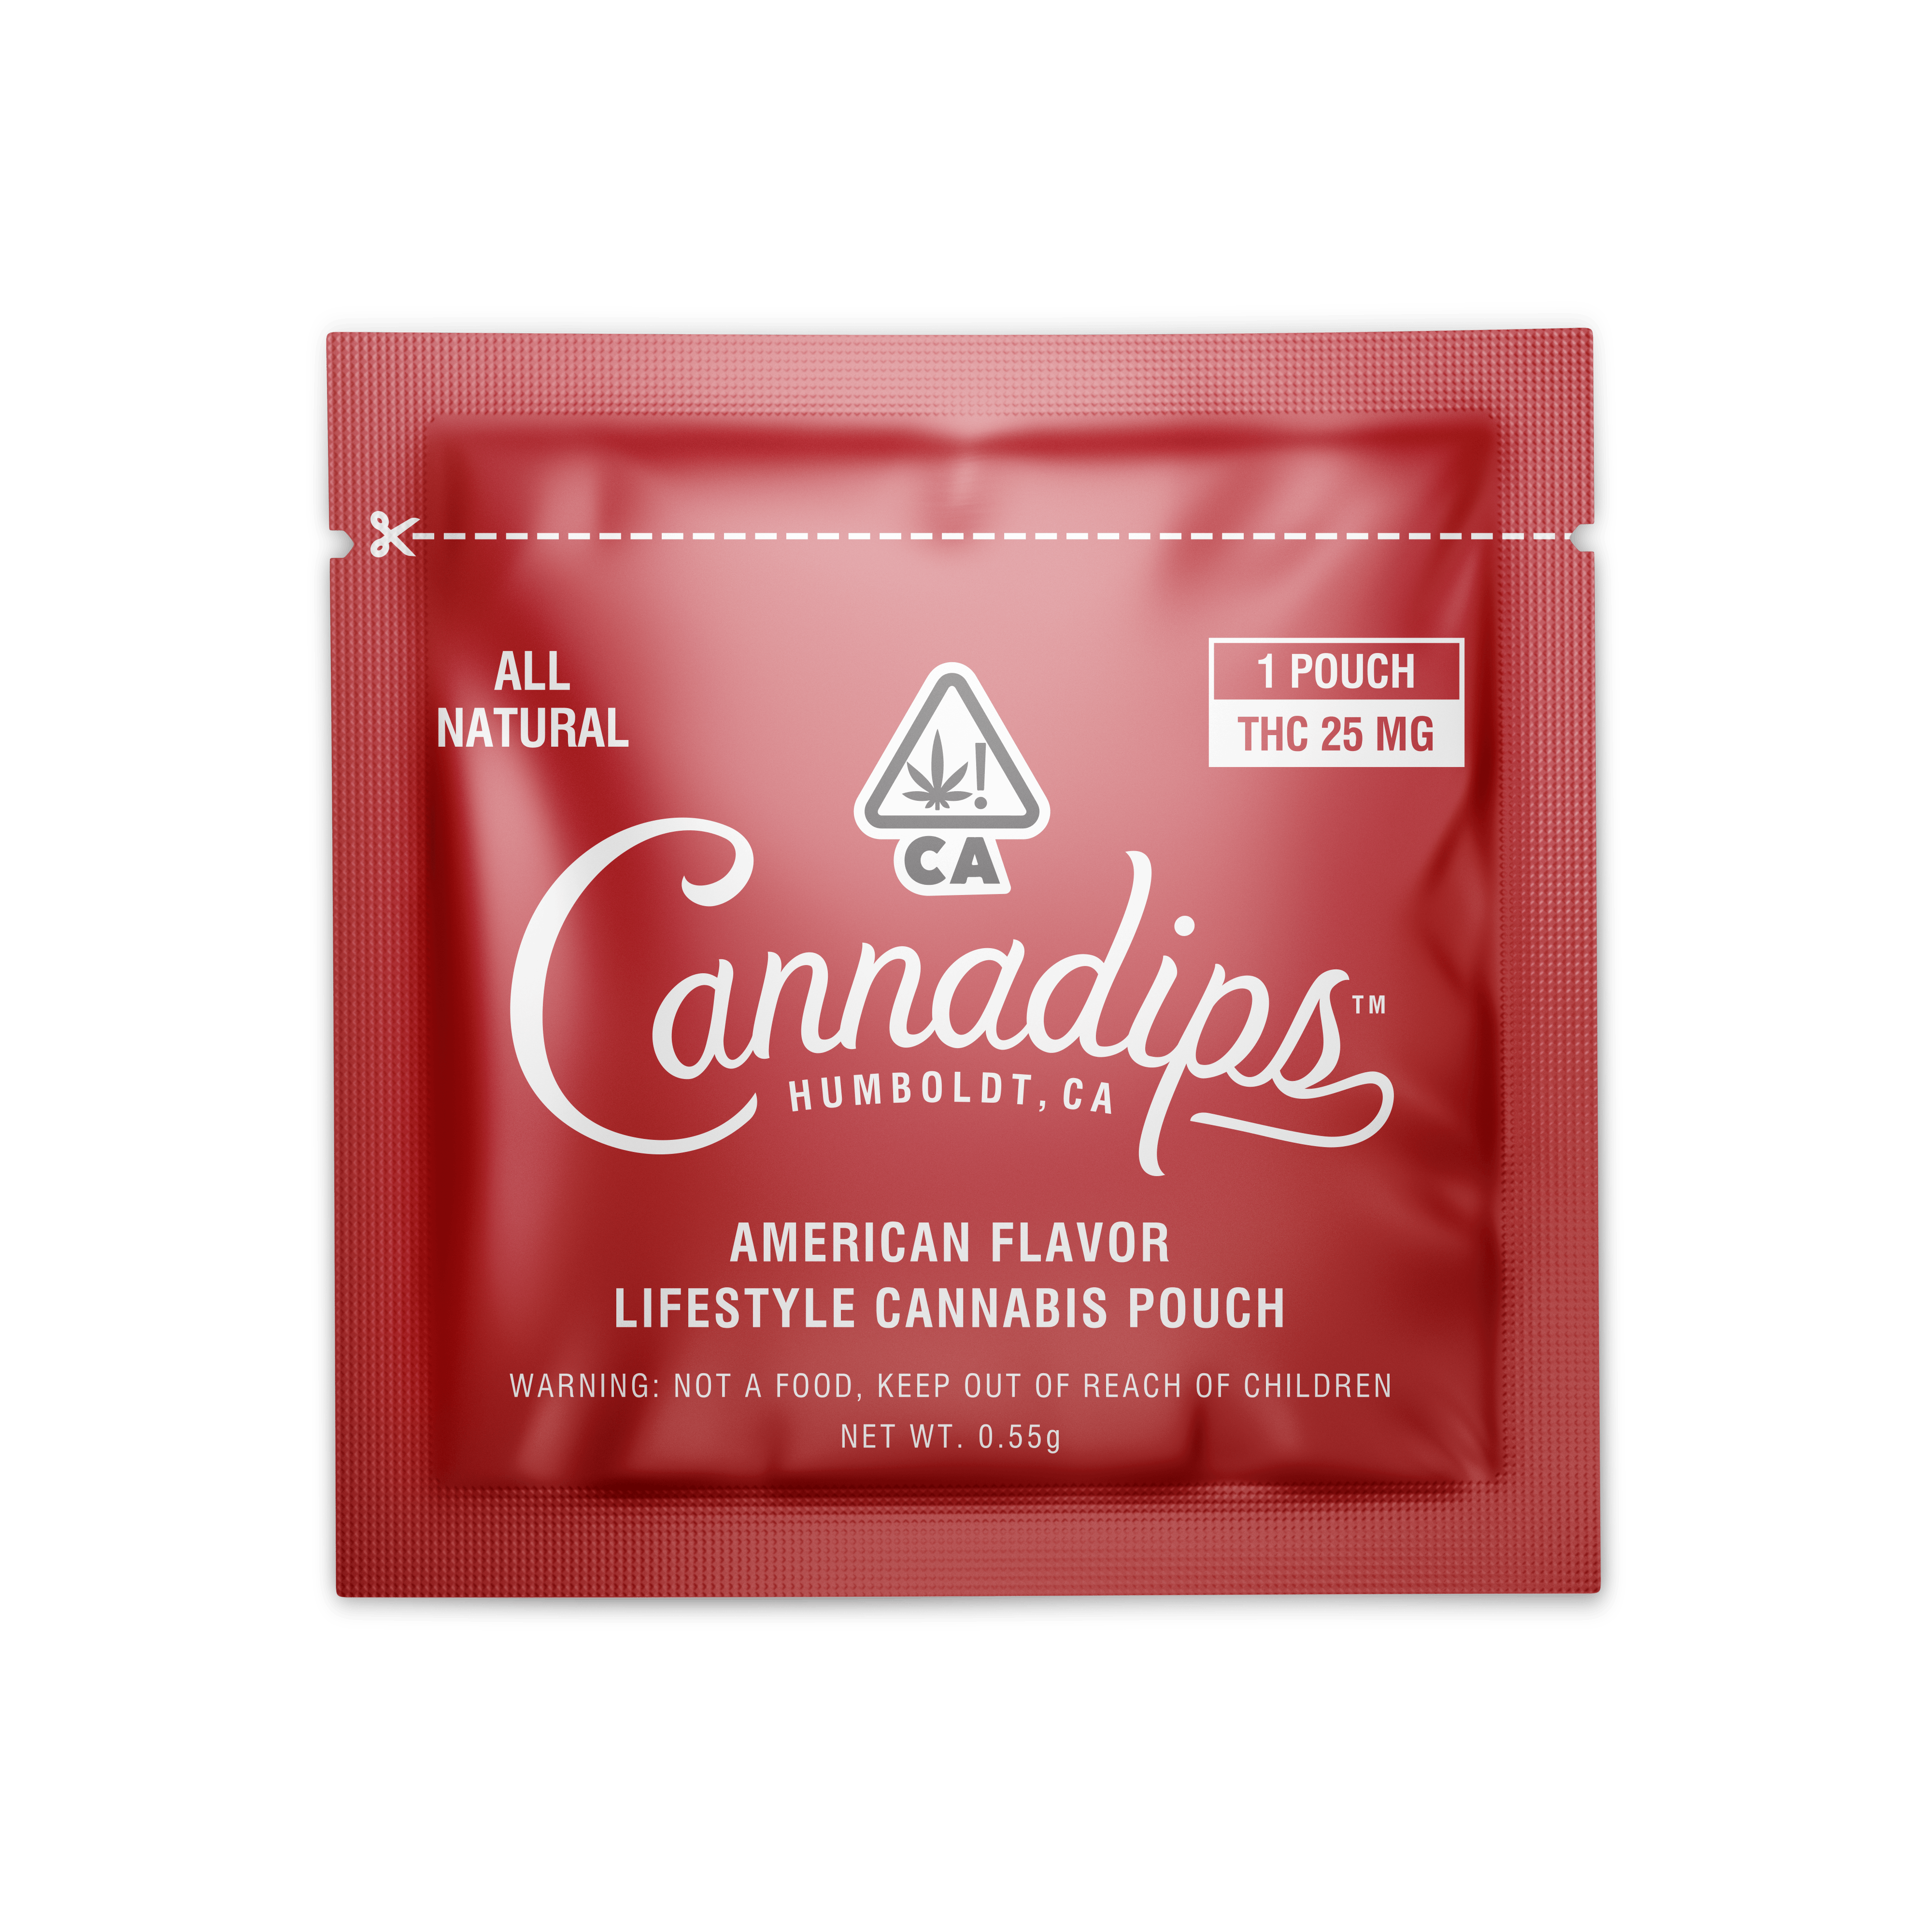 marijuana-dispensaries-green-cross-pharma-rancho-mirage-2c-palm-springs-2c-palm-desert-in-cathedral-city-cannadips-american-pouches-thc-2c-high-dose-single